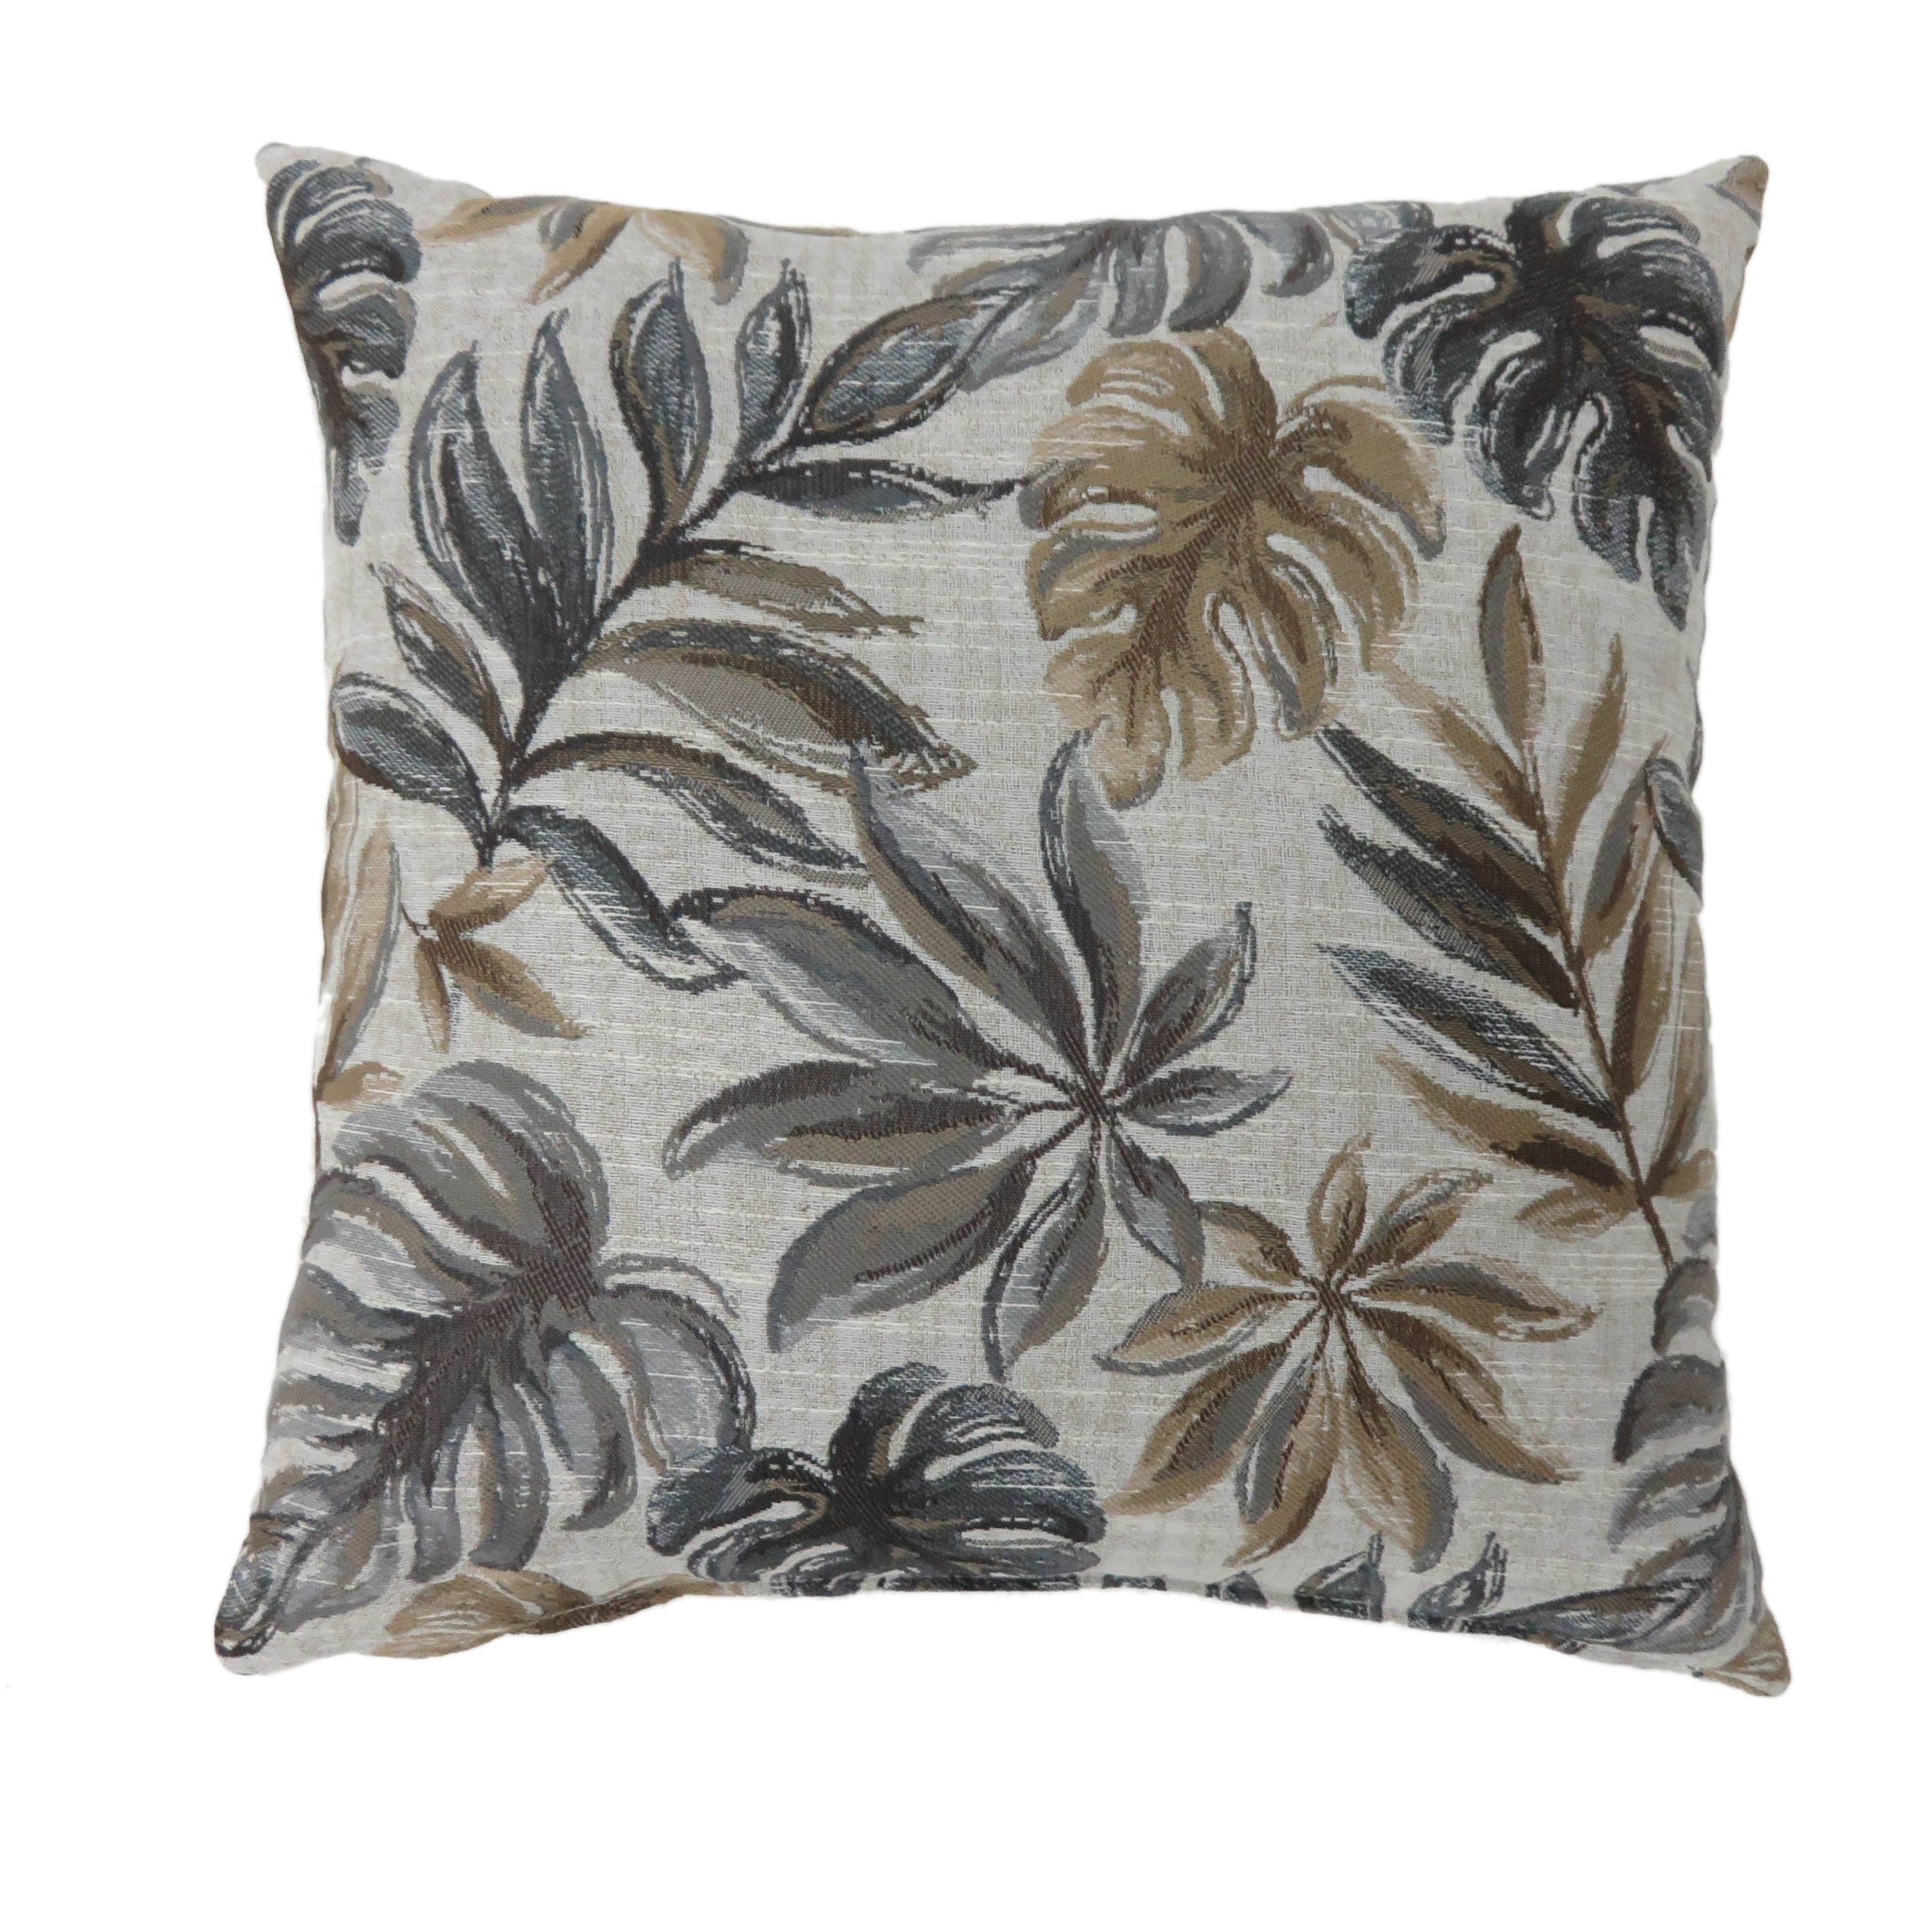 Contemporary Grey Throw Pillows Set of 2 Cream Silver Floral Paisley Bohemian Eclectic Patterned Transitional Polyester Two Embroidered Removable Cover